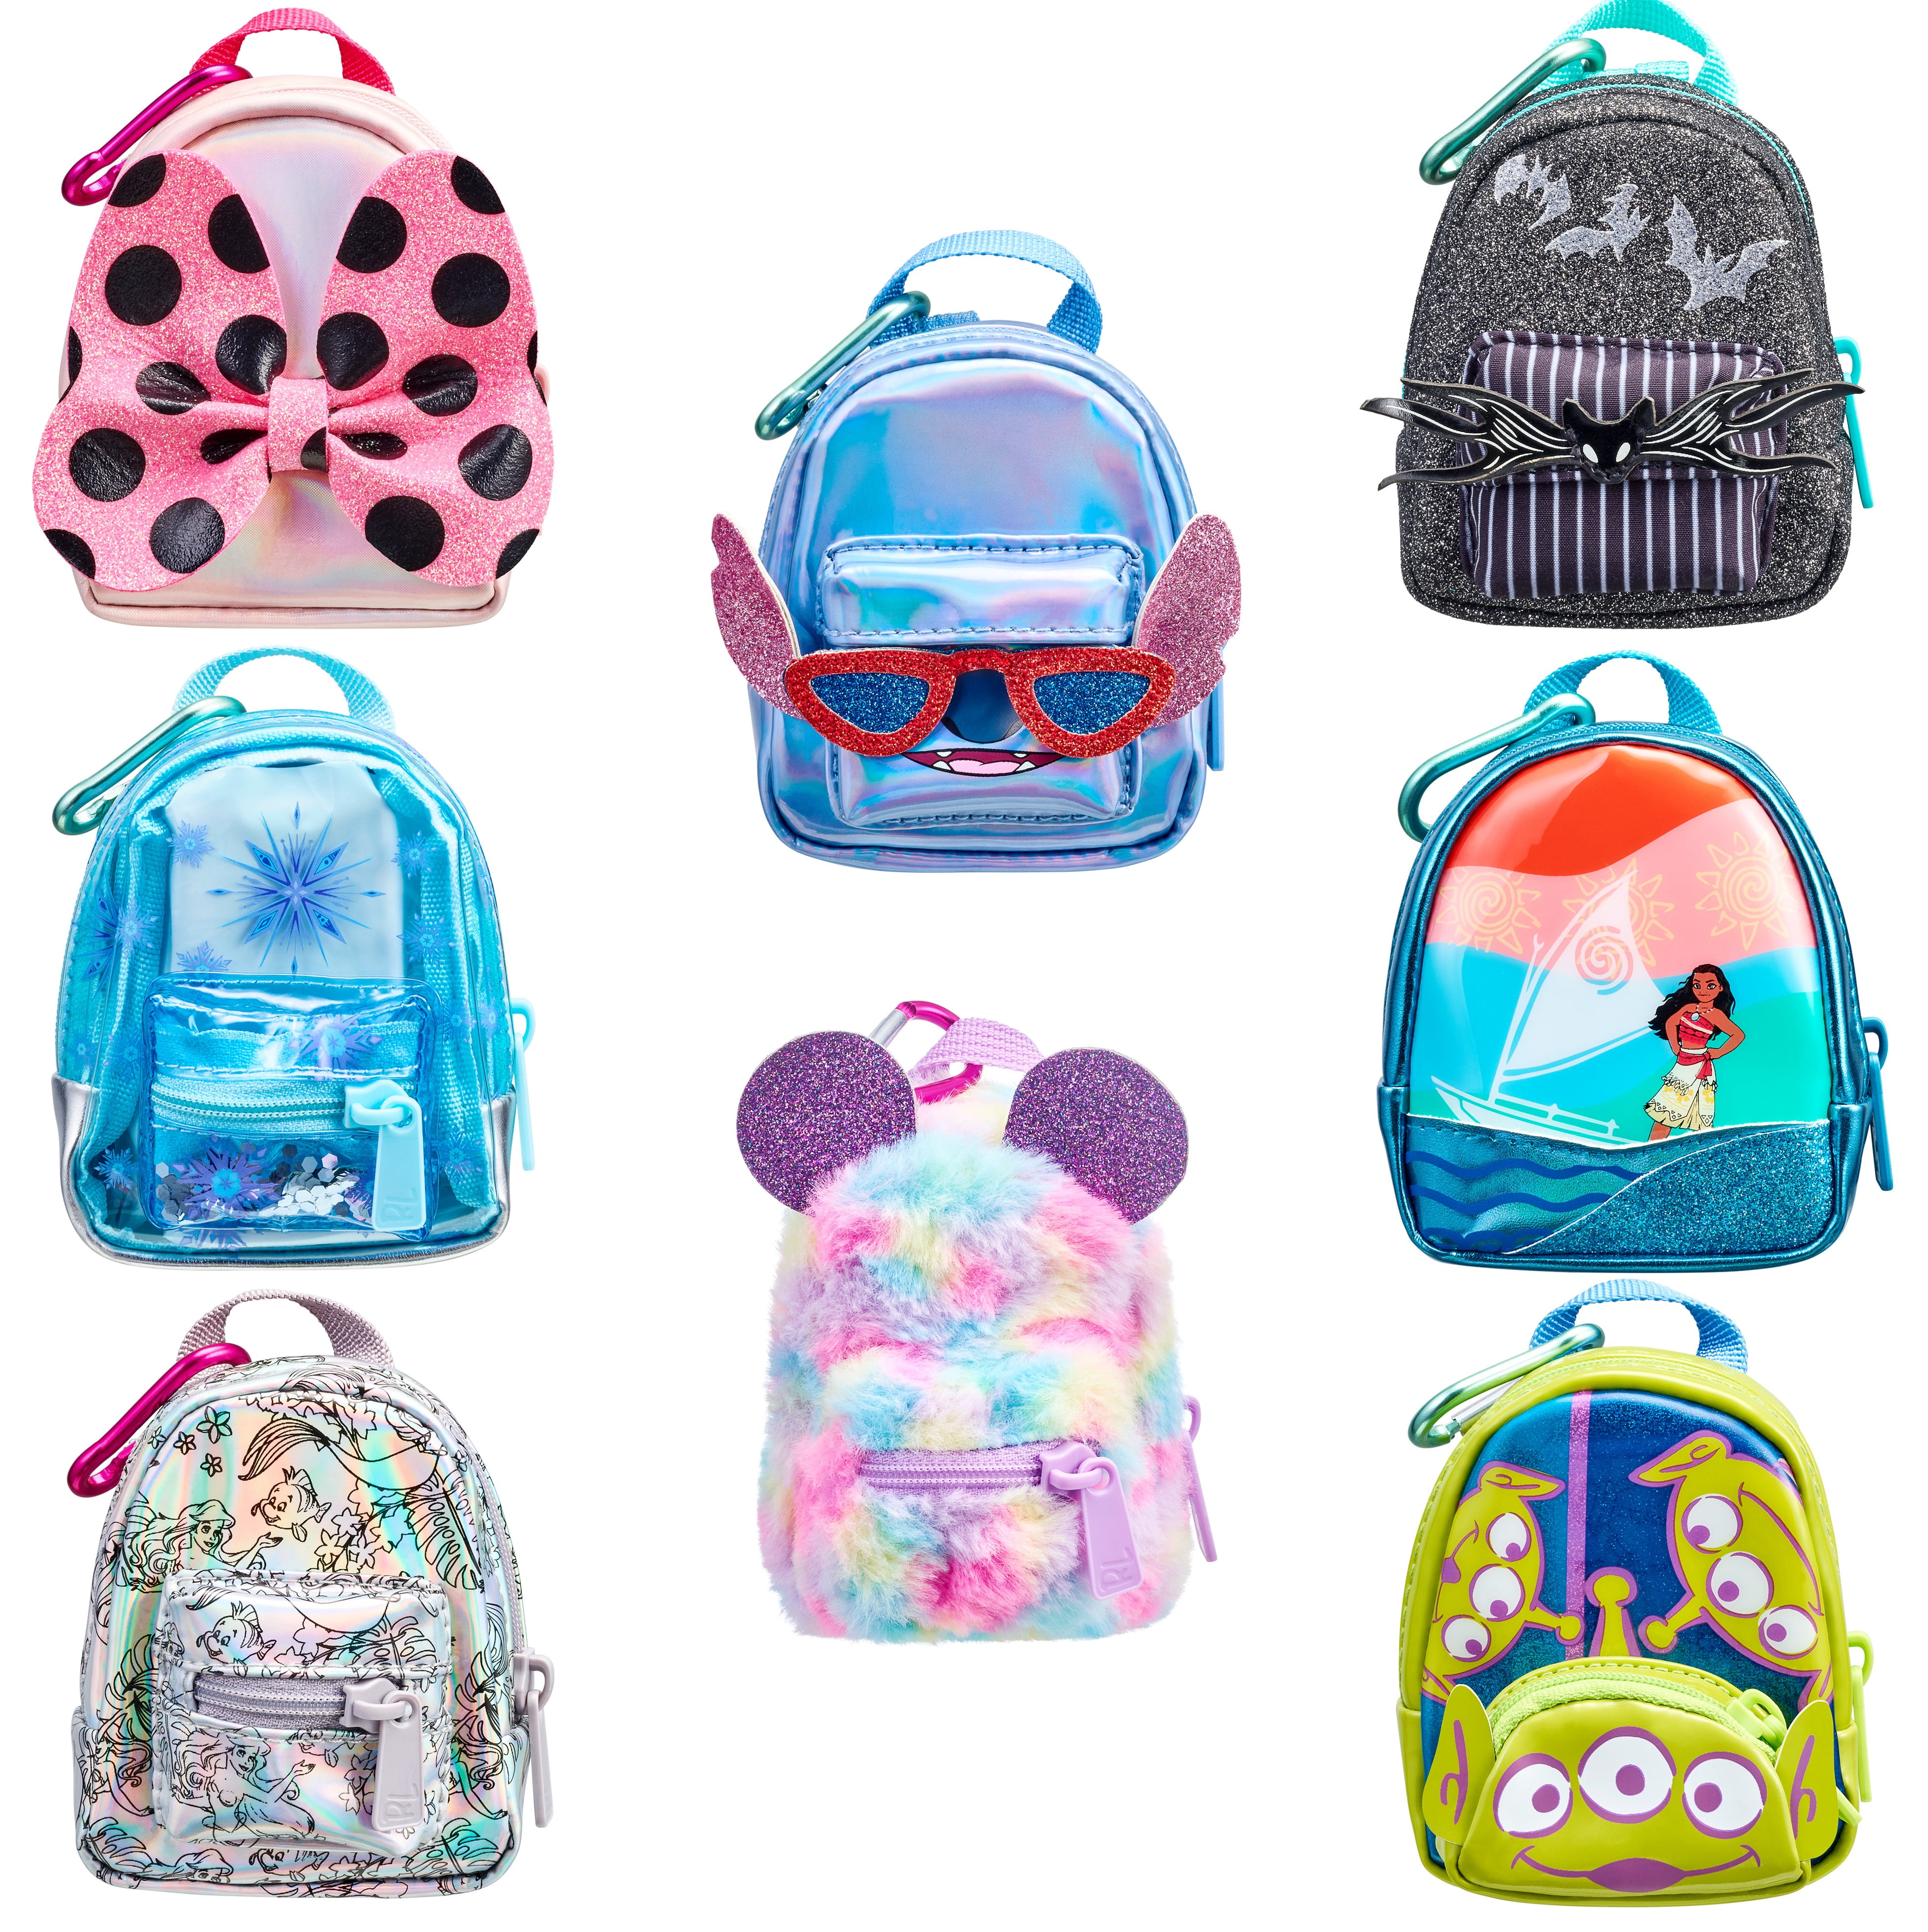 Frozen 11 Mini Backpack with Metallic Piping